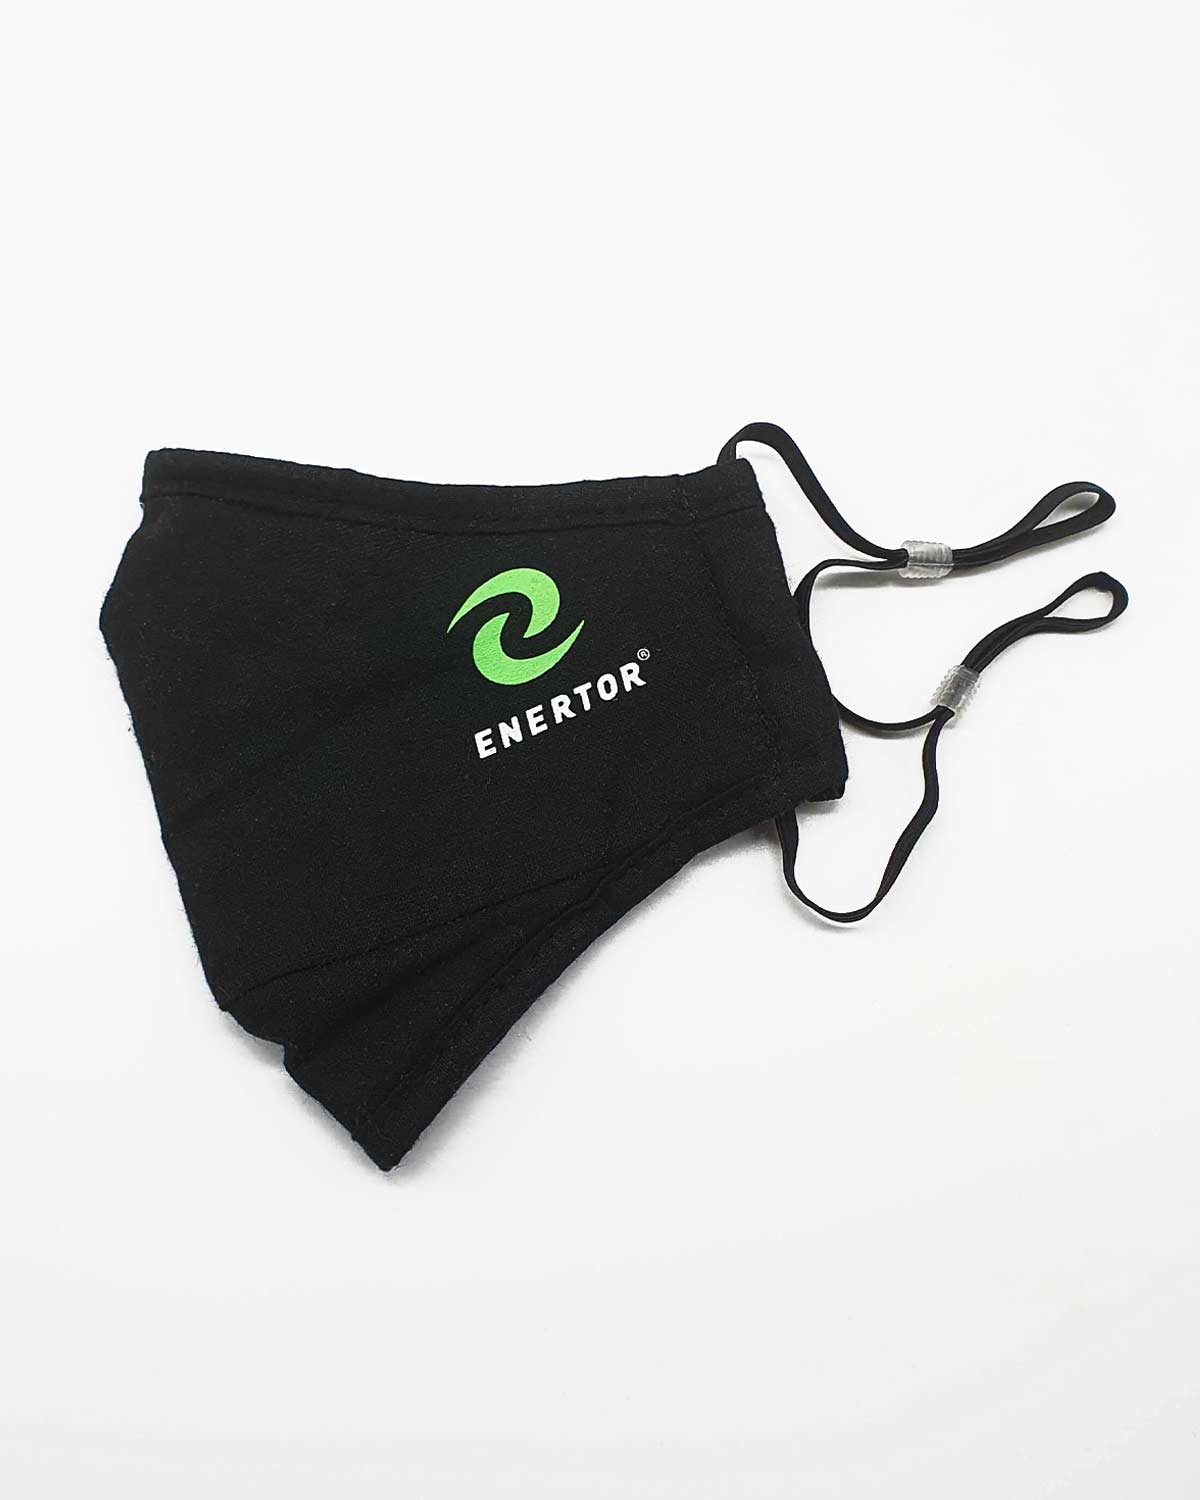 Enertor Face Mask with adjustable straps in black with green and white logo on the right hand side folded view